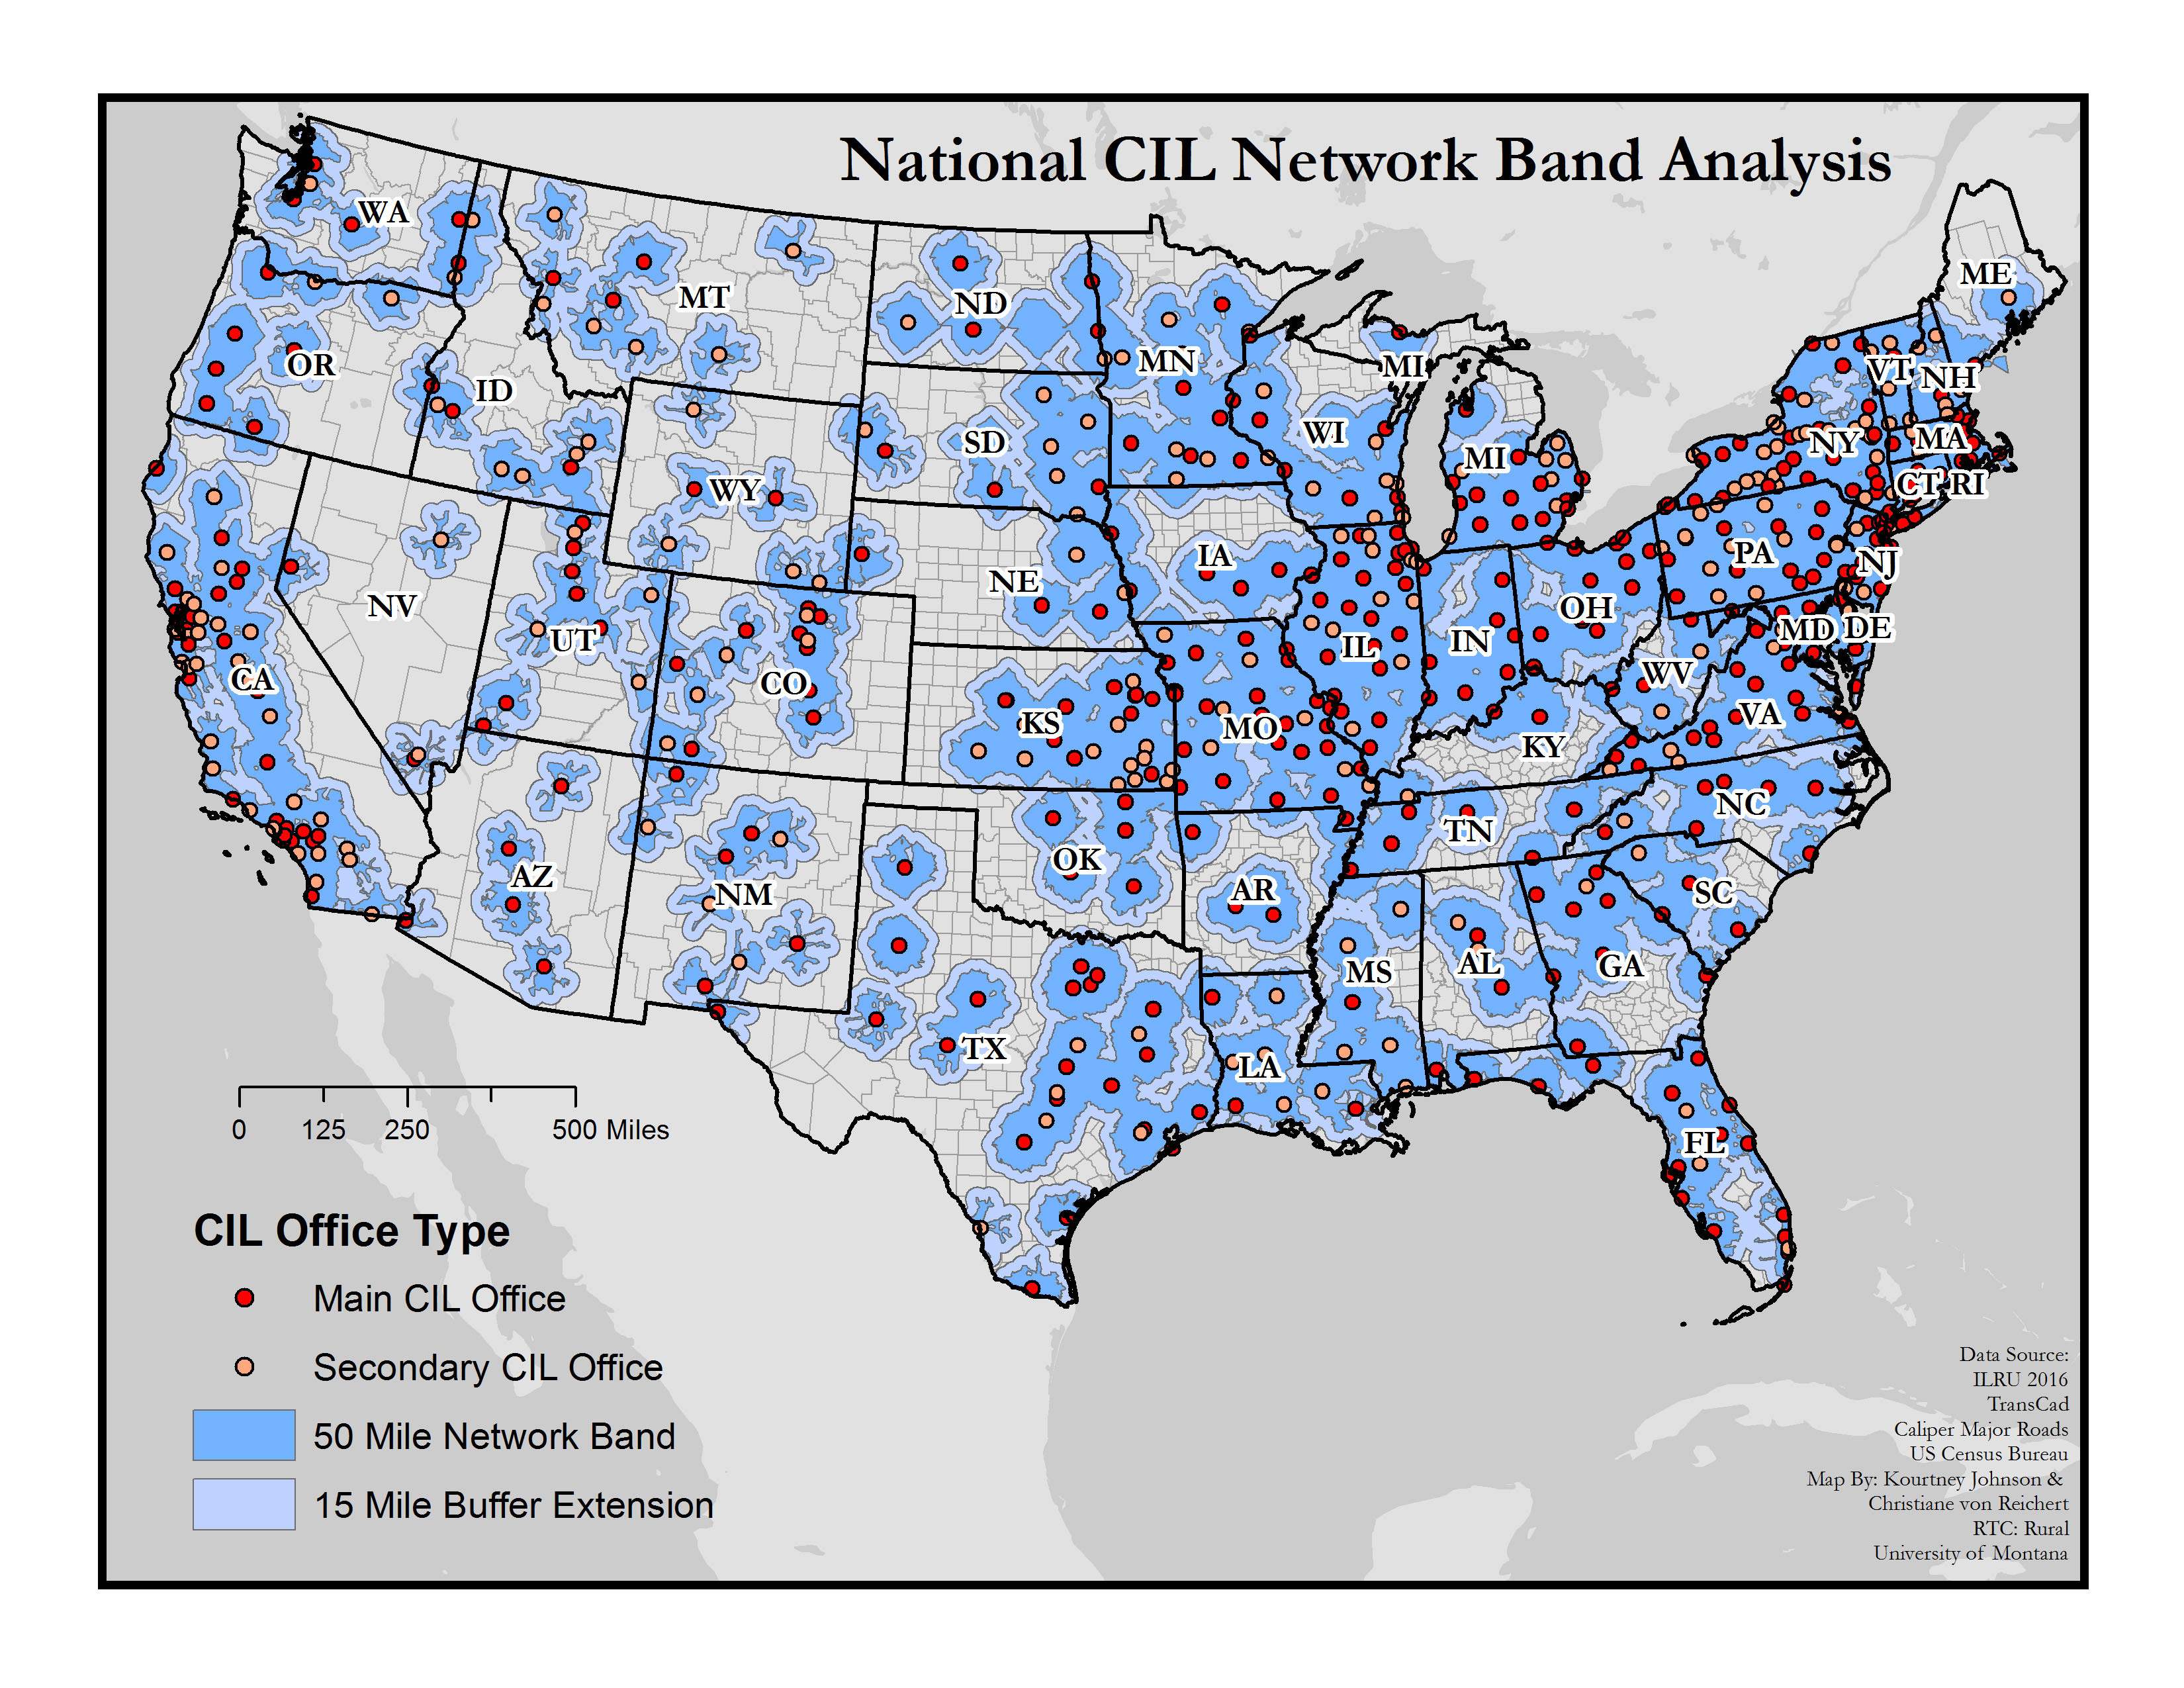 Map of US with Main and Secondary CILs marked, with blue network bands surrounding them.